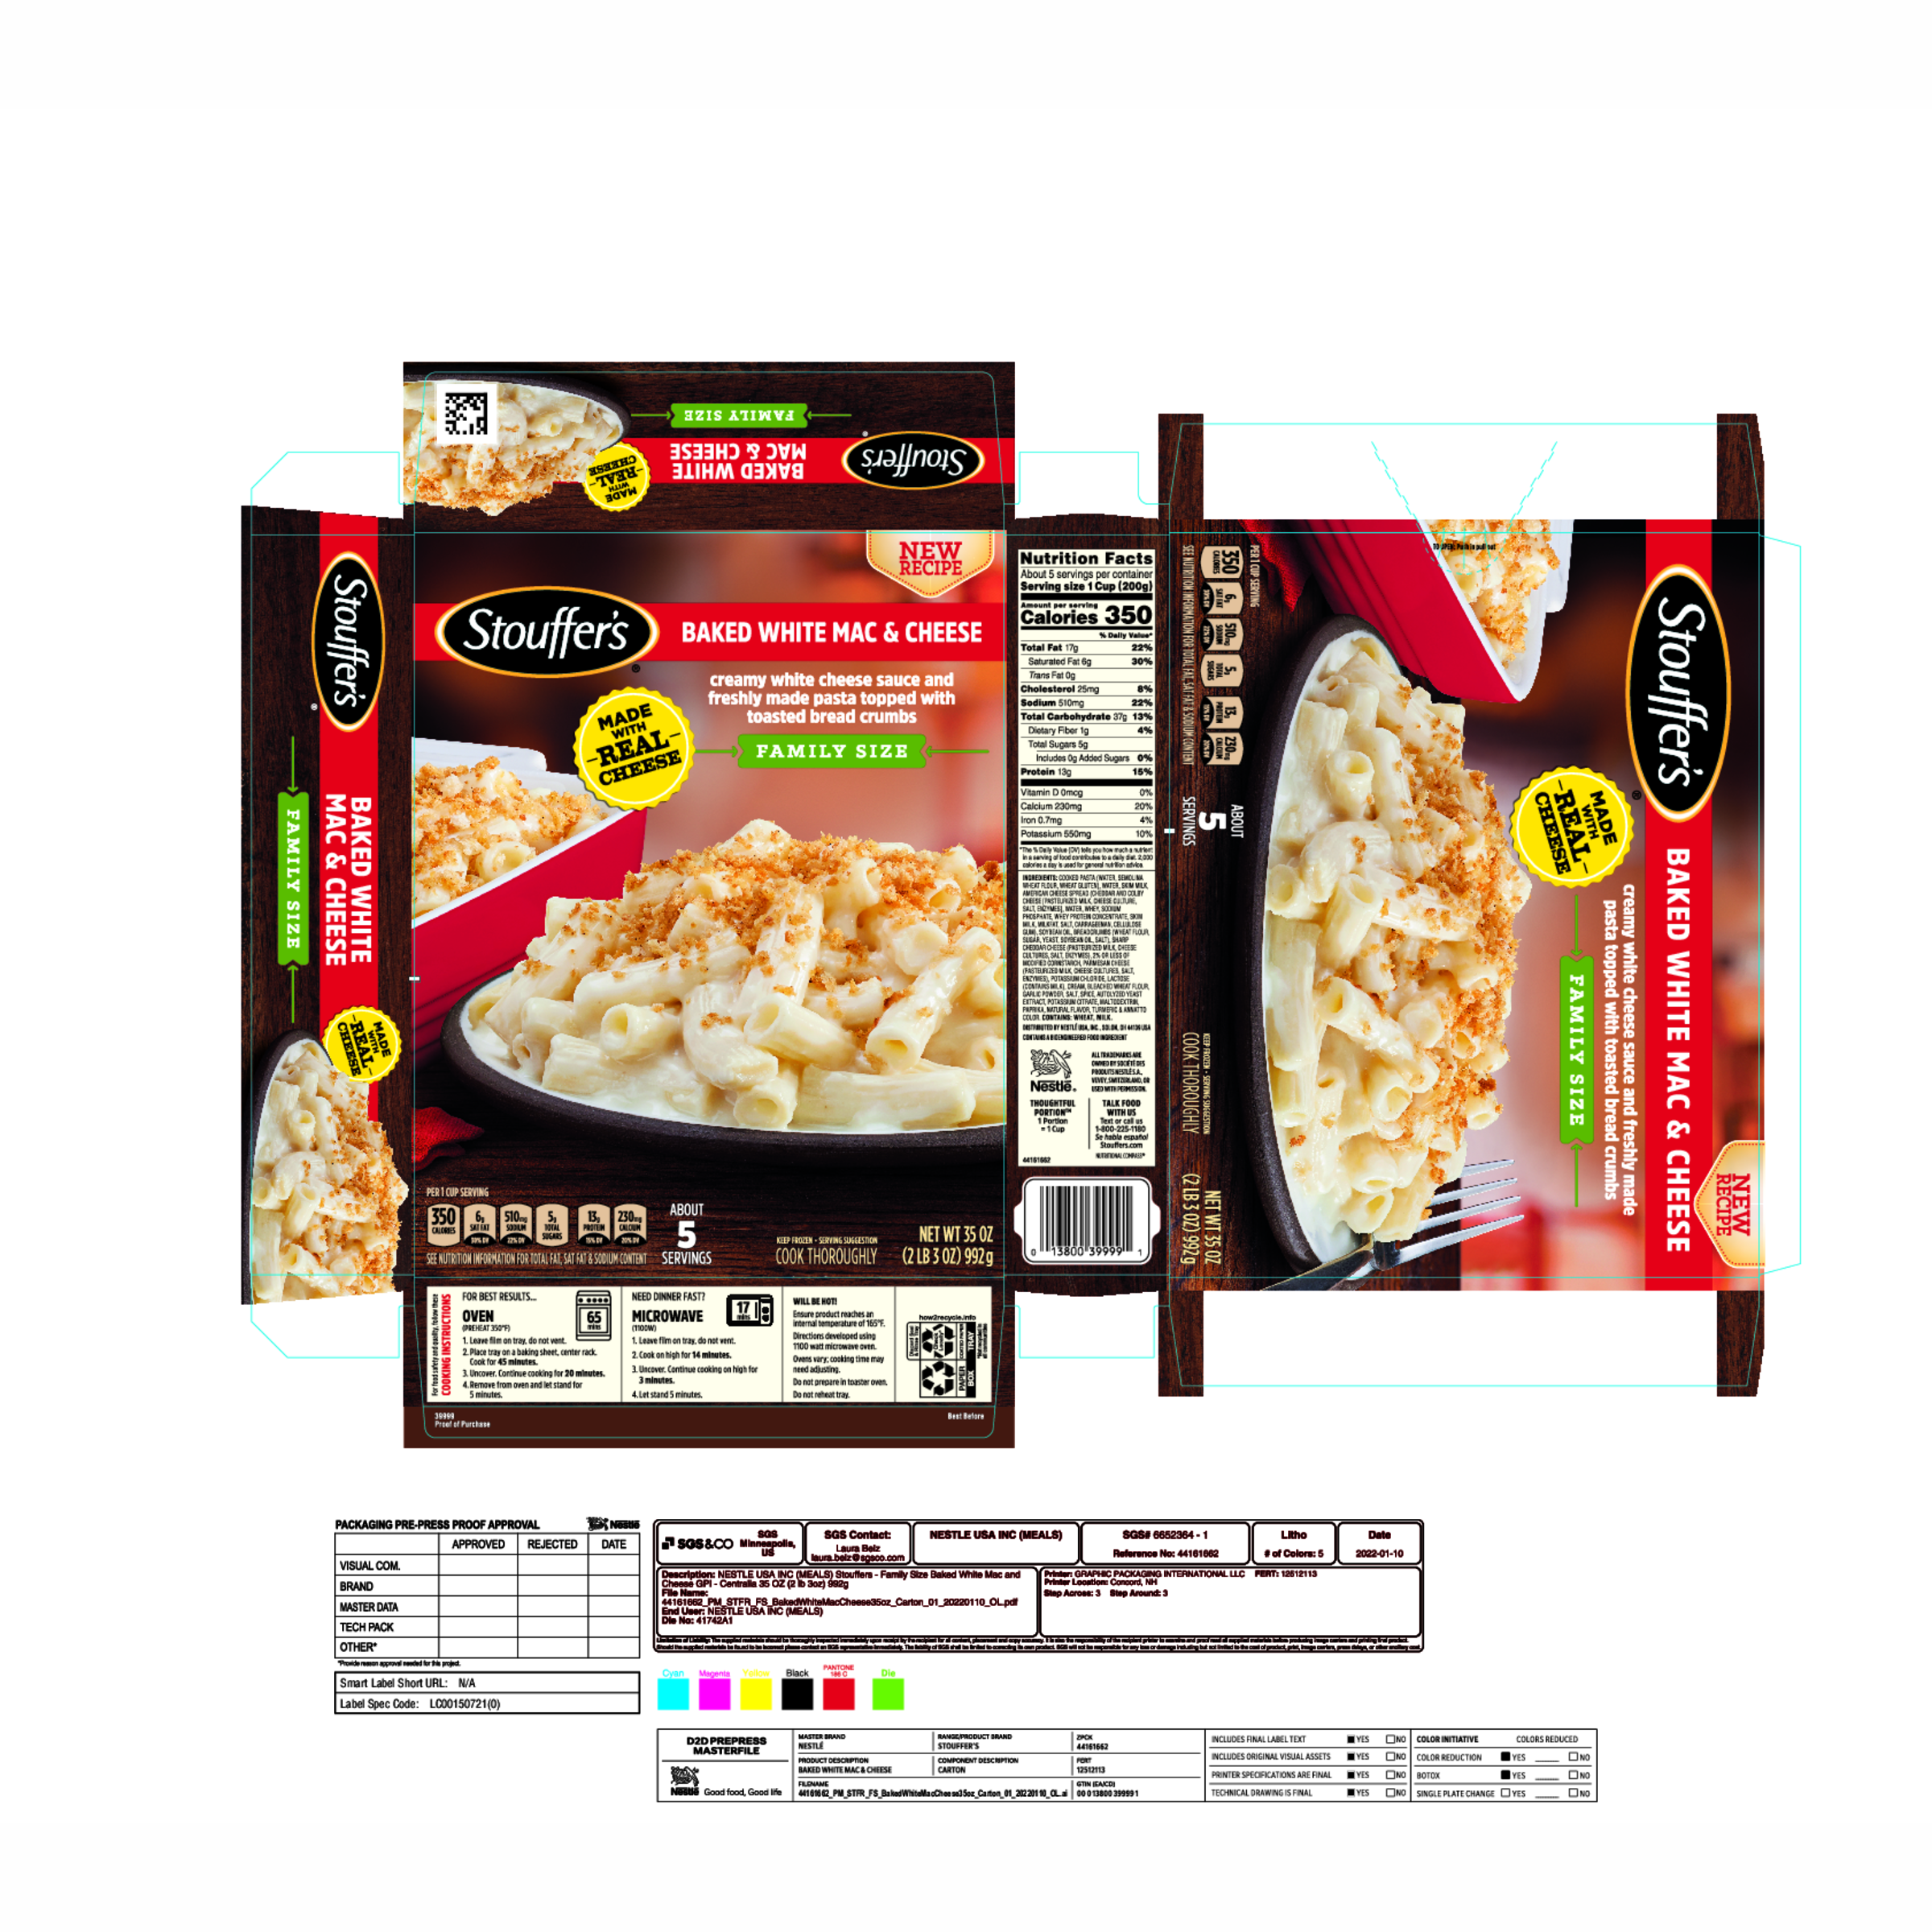 STOUFFER'S Baked White Mac & Cheese (Family Size) 6 units per case 35.0 oz Product Label